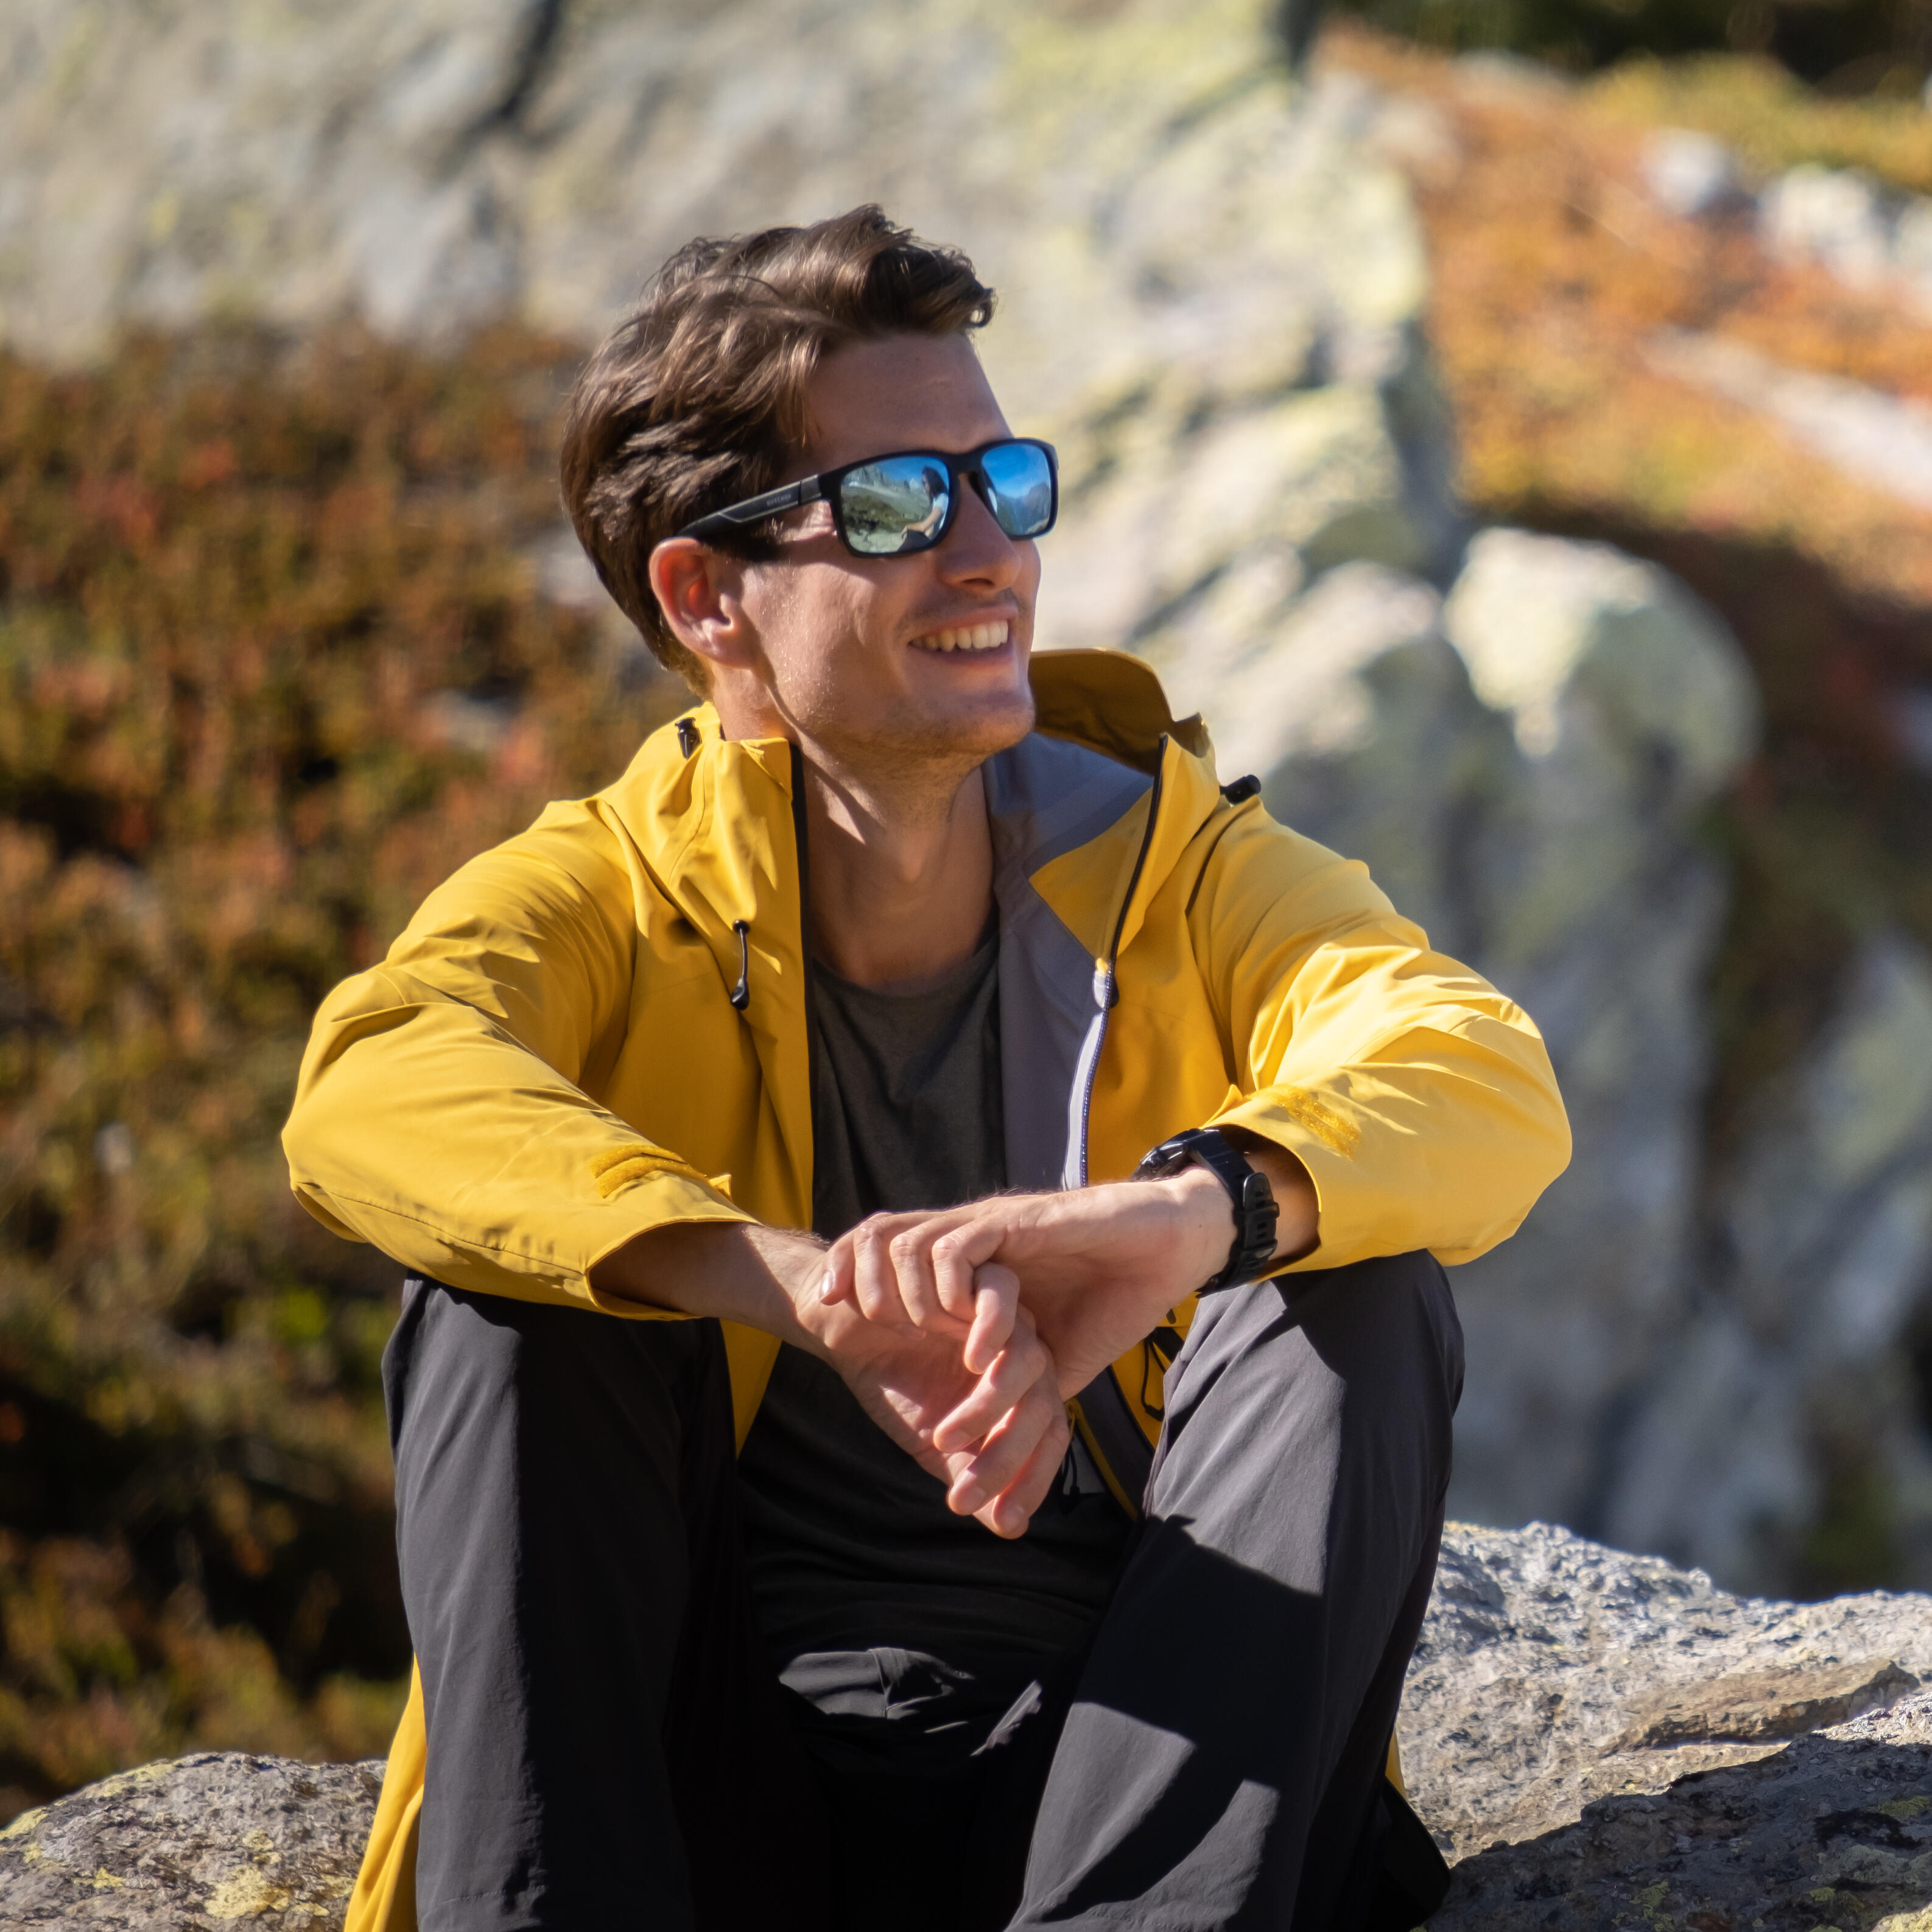 Decathlon Sports India - Hiking Sunglasses Our optical engineers developed  these sunglasses for hiking. Ideal for occasional use in the mountains..  Anti-UV lenses block out 100% of the sun's harmful rays and